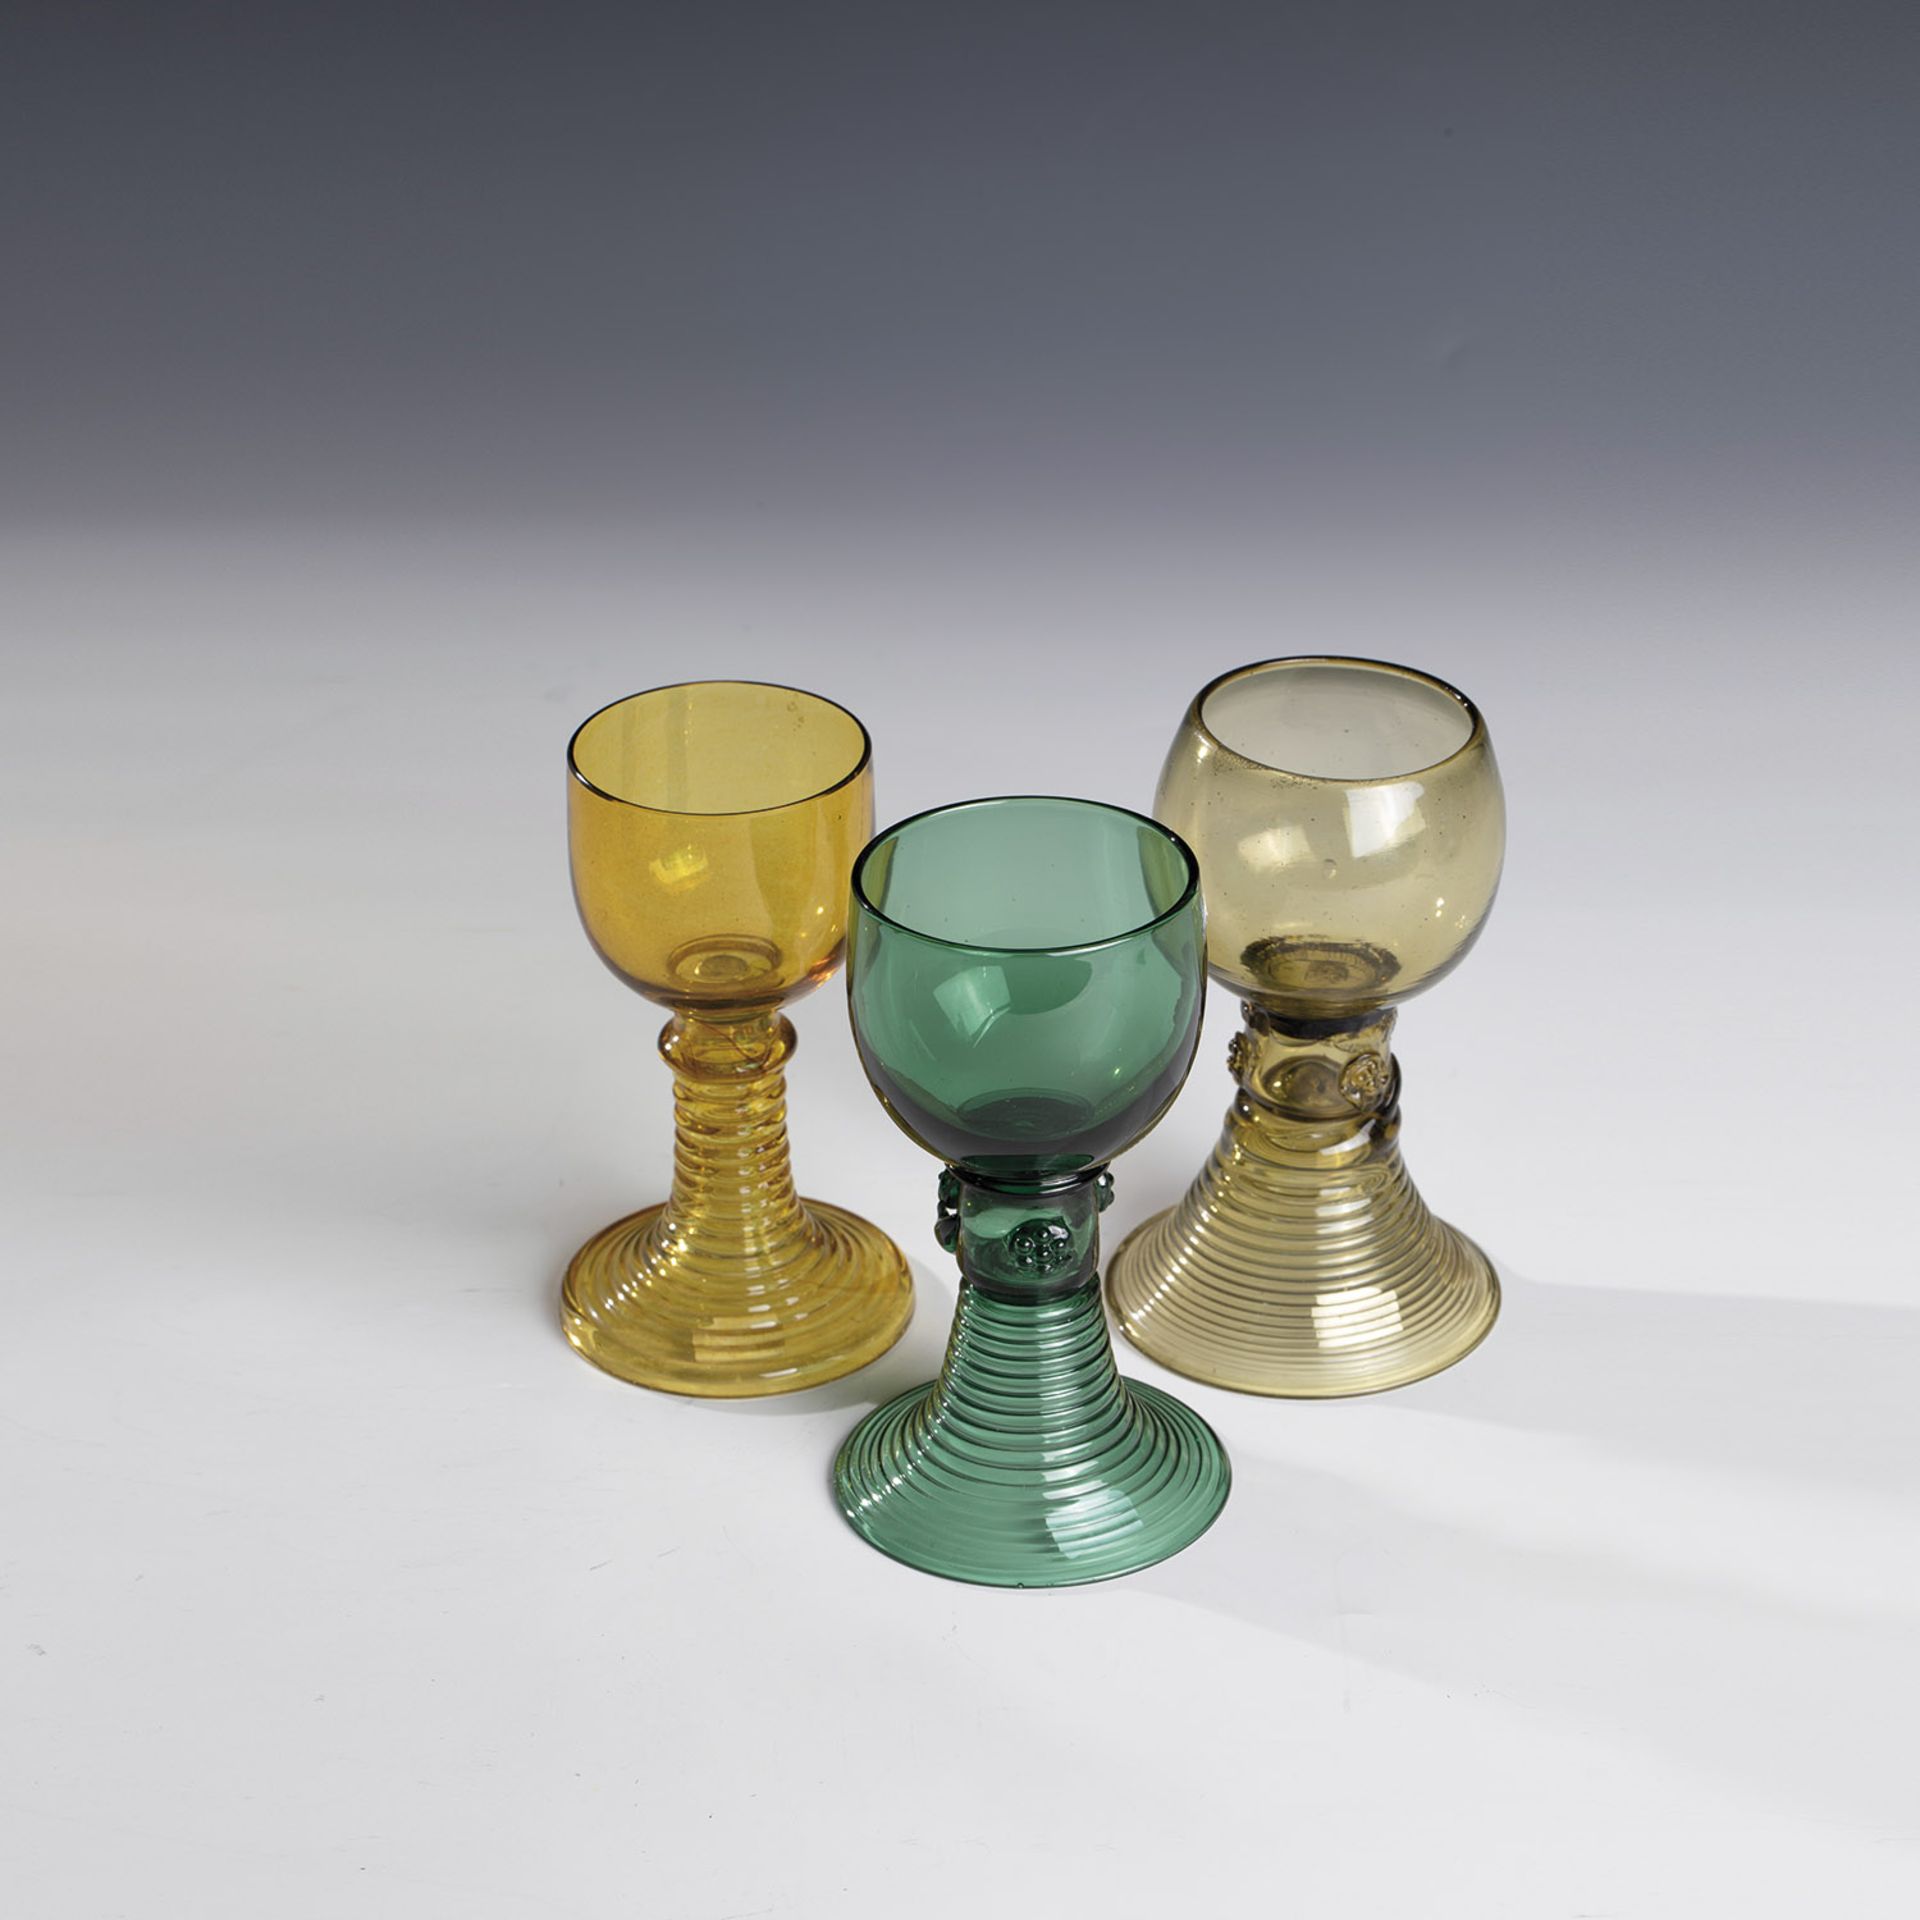 Three Romans 18th/19th century Green, amber and olive-coloured glass, partly with demolition. Two